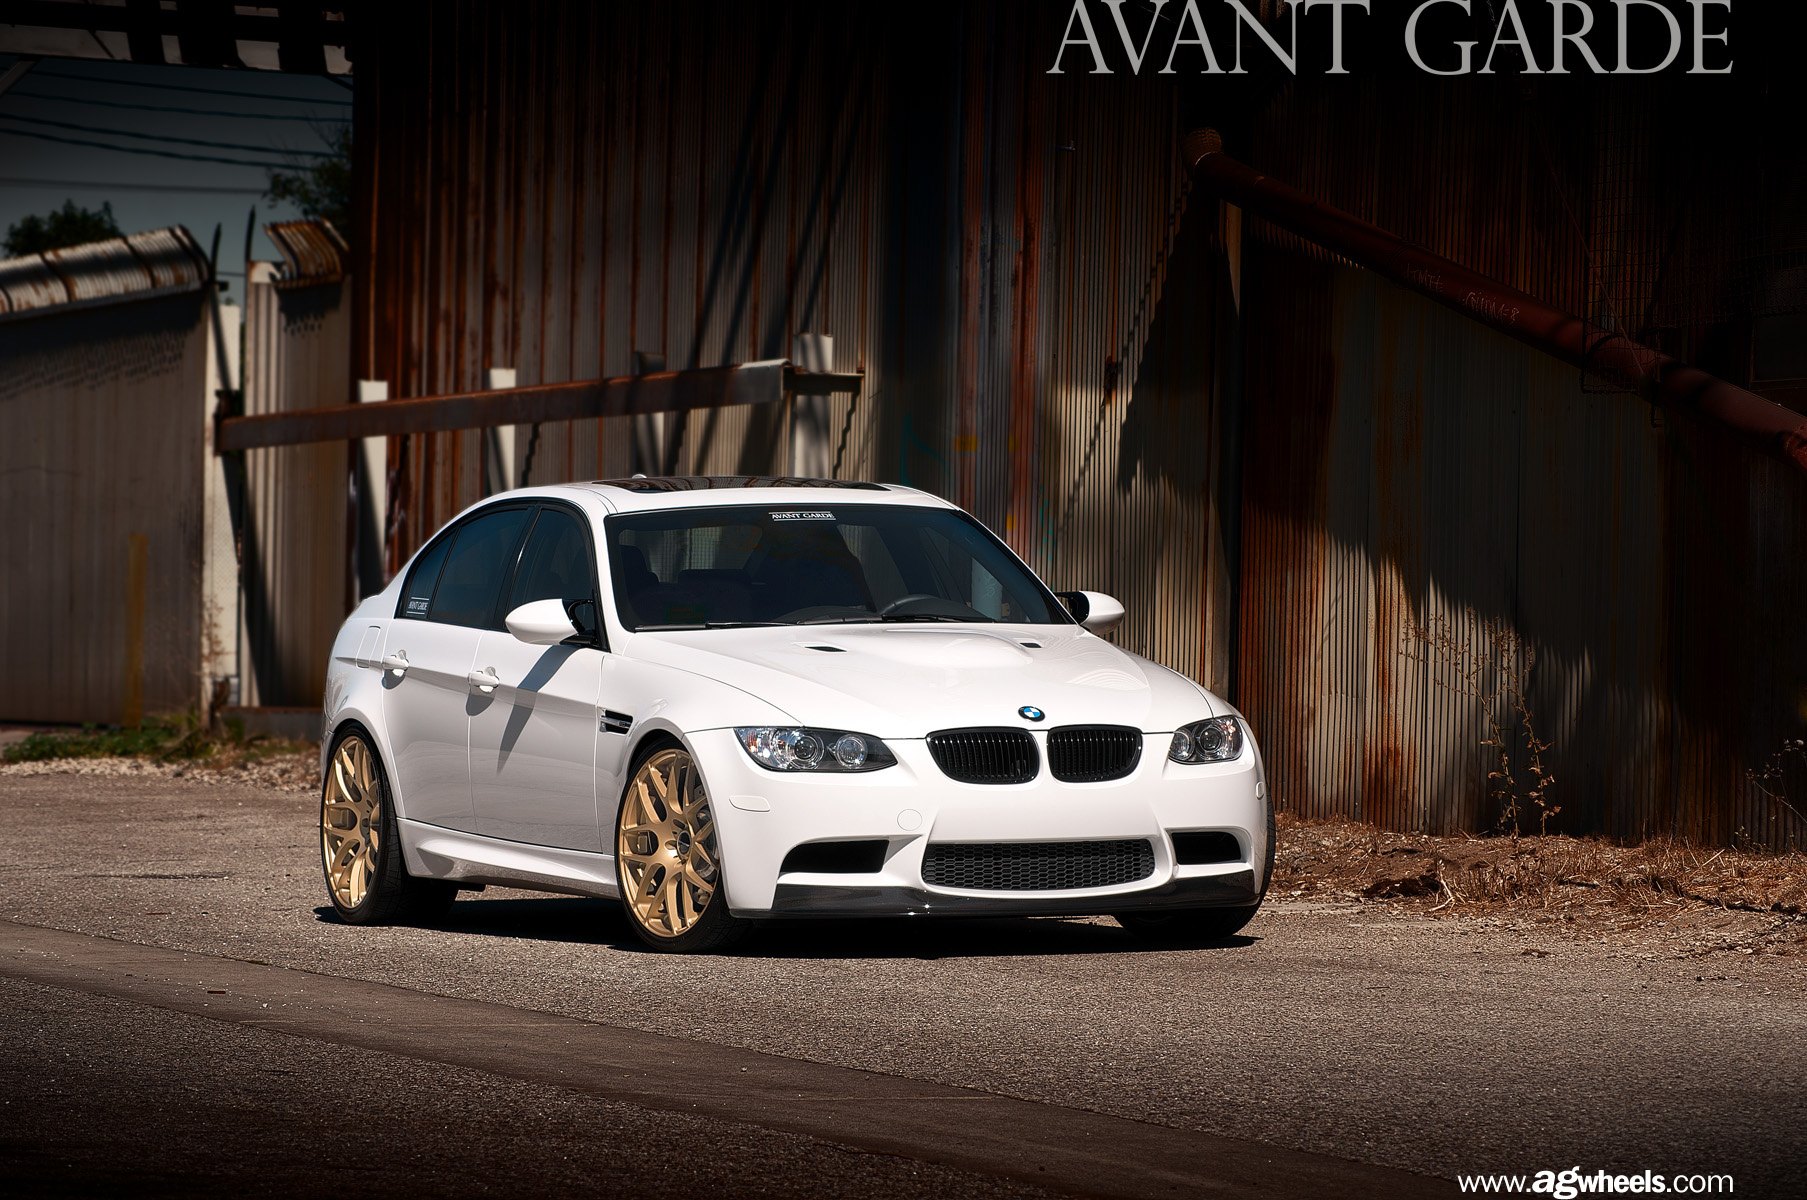 Custom Hood with Air Vents on White BMW 3-Series - Photo by Avant Garde Wheels